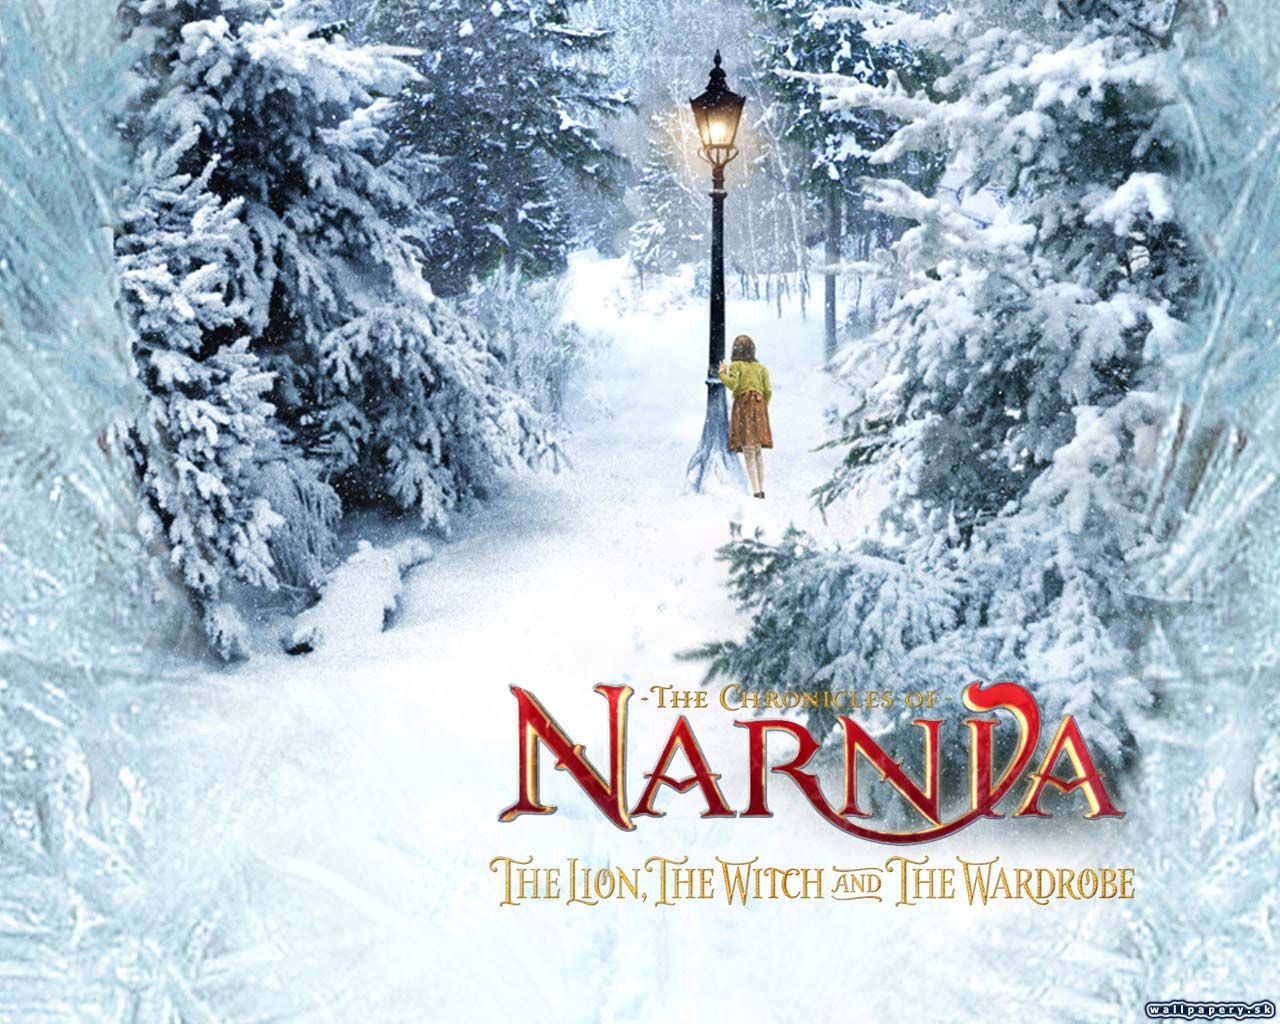 The Chronicles of Narnia: The Lion, The Witch and the Wardrobe - wallpaper 5